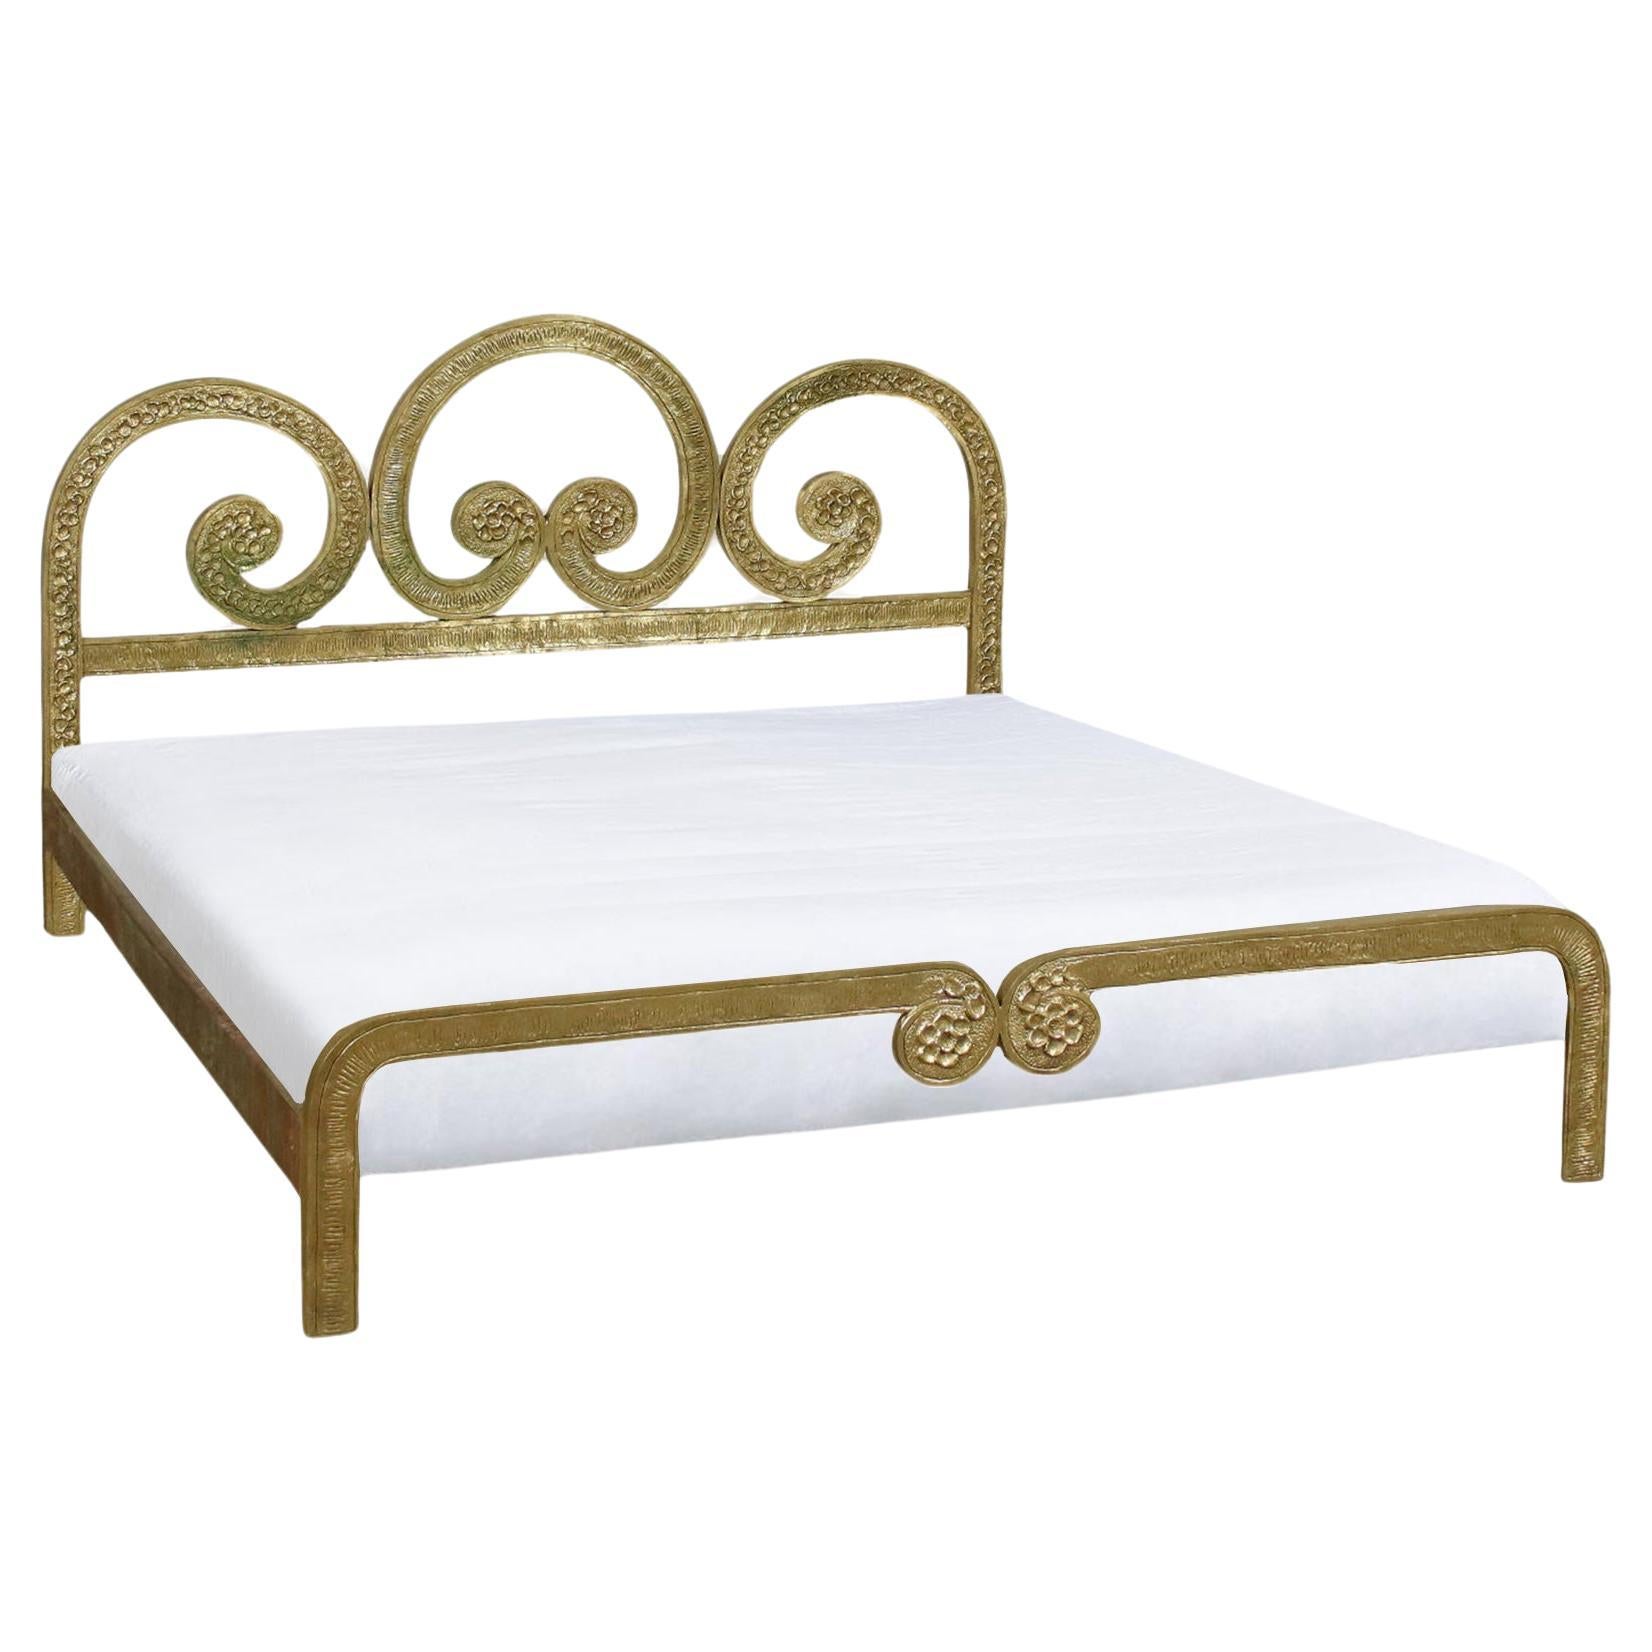 Double Bed Frame in Cast Bronze by Angelo Brotto for Esperia, Italy, circa 1970 For Sale